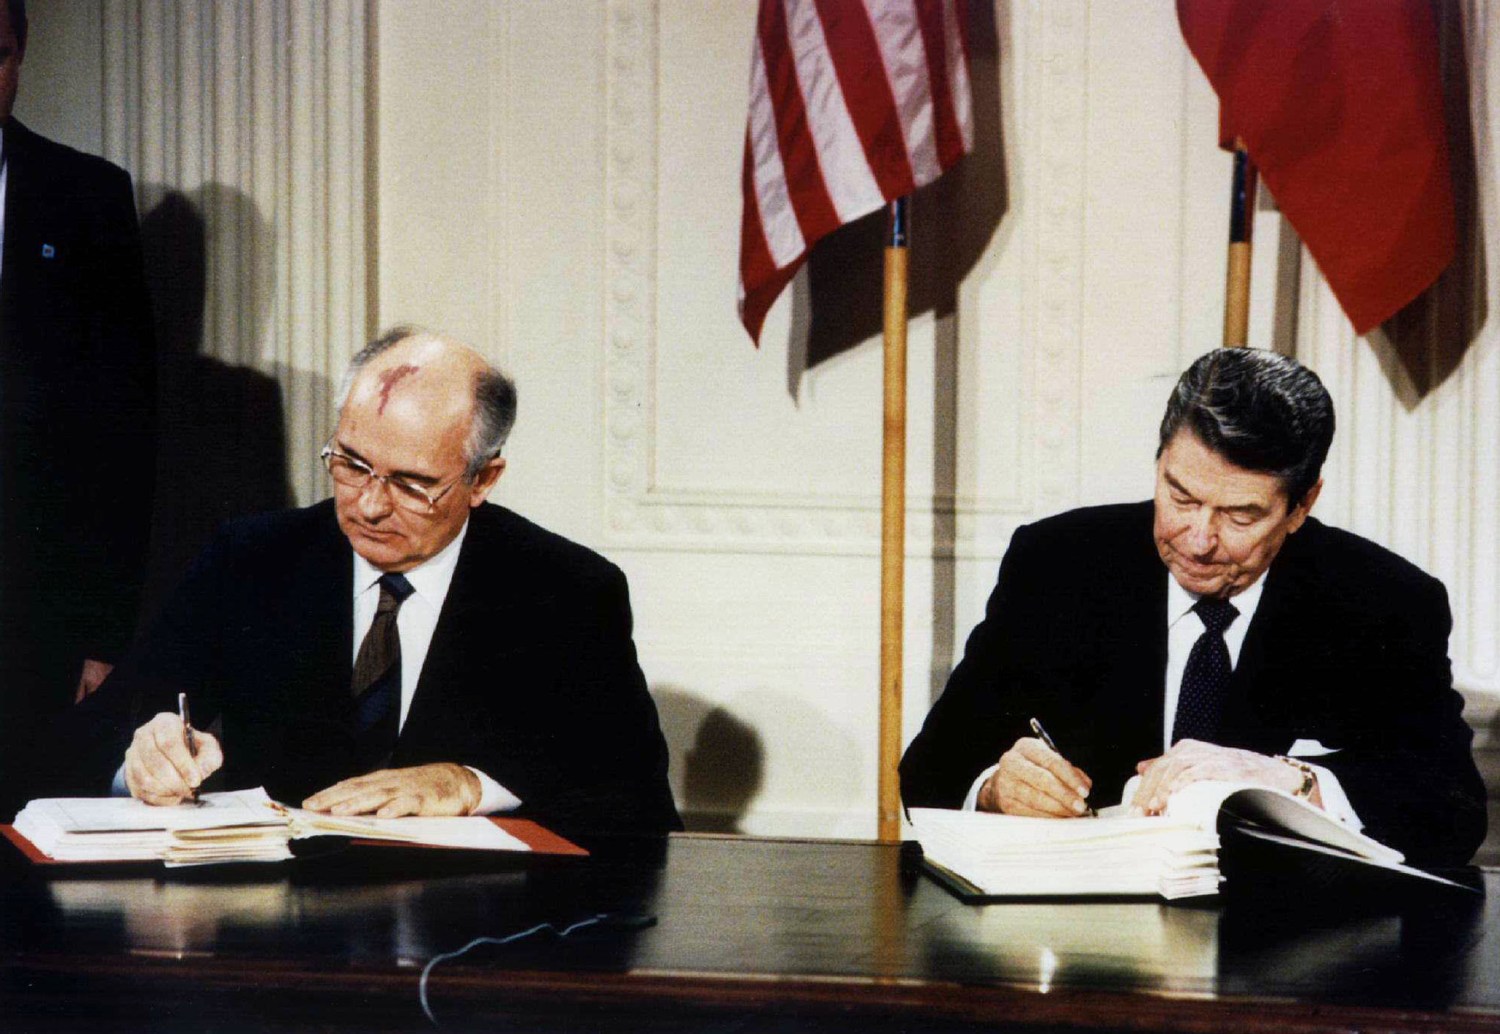 FILE PHOTO 8DEC87 - U.S. President Ronald Reagan (R) and Soviet President Mikhail Gorbachev sign the Intermediate-Range Nuclear Forces (INF) treaty in the White House December 8 1987. Reagan was elected as the 40th U.S. president in 1980.CM - RP2DRHXTDDAC